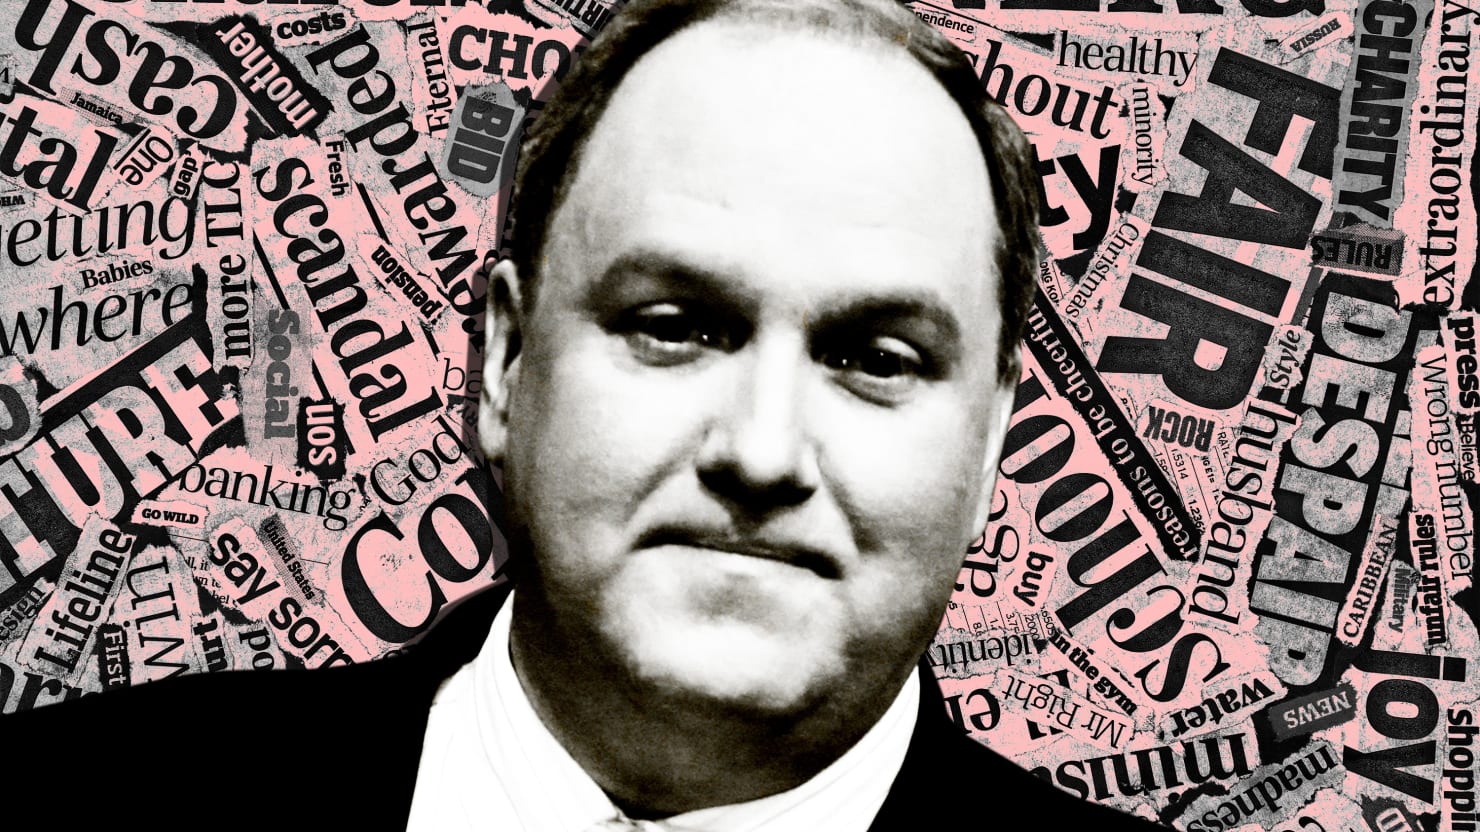 Water Finds Its Level as Fox News Hires Dictator-Loving, Deep-State Loathing John Solomon - The Daily Beast